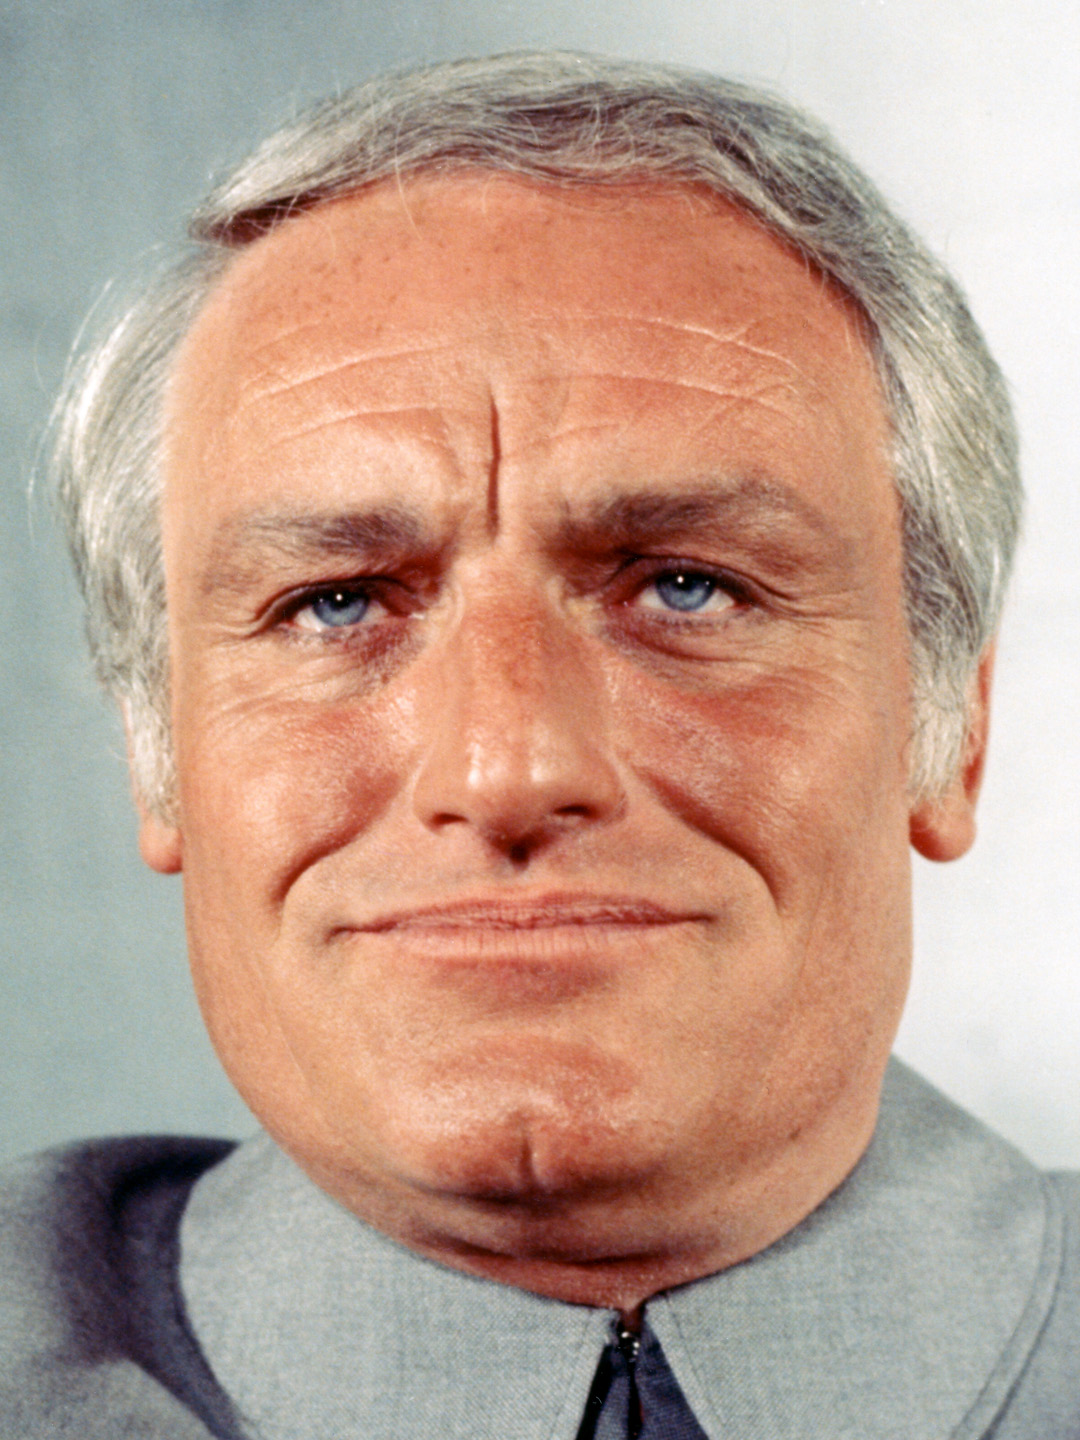 How tall is Charles Gray?